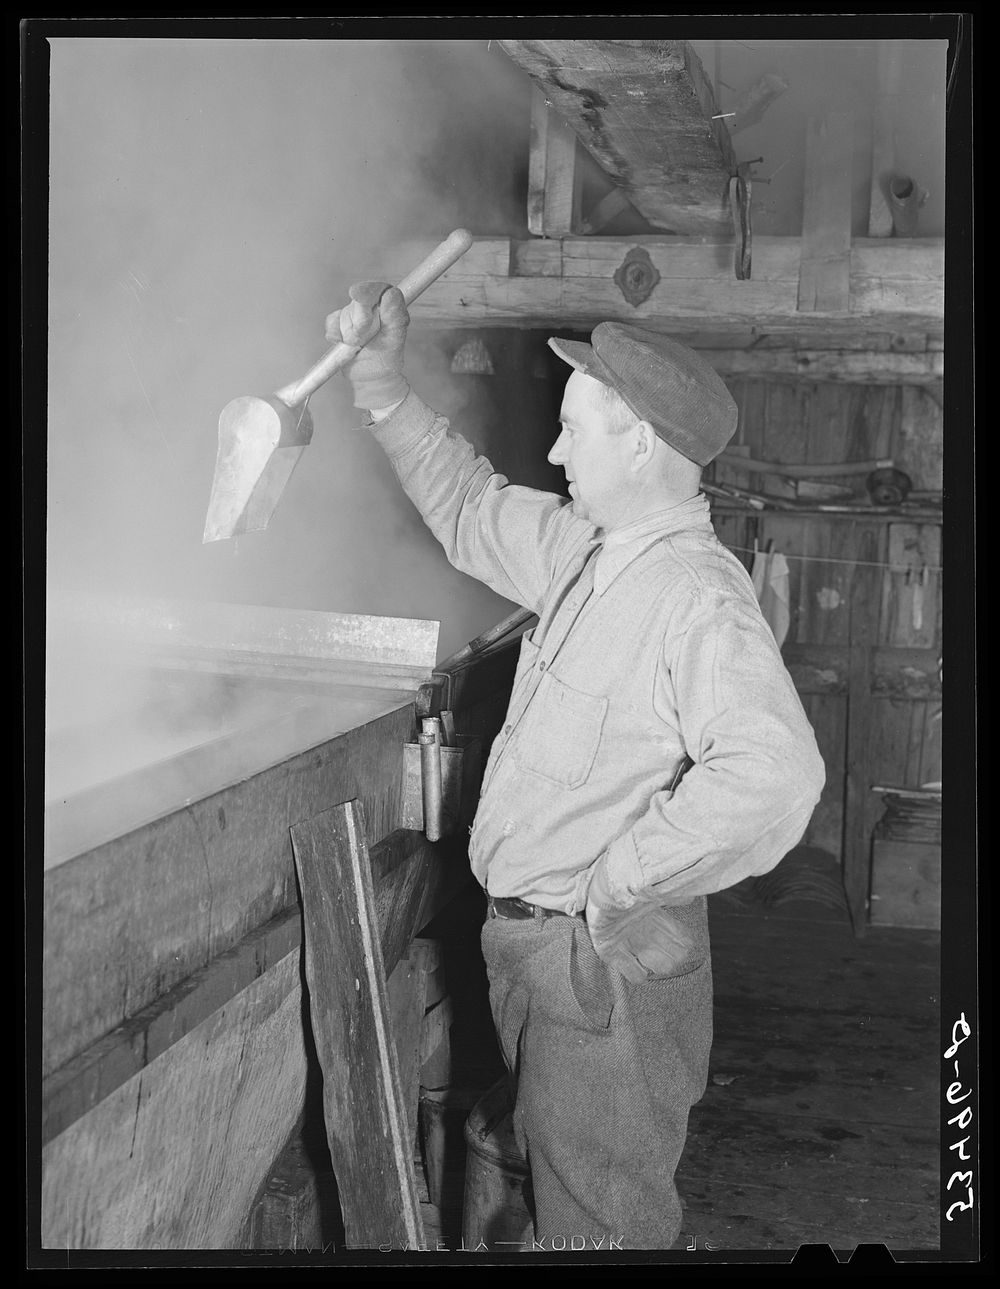 Walter. M Gaylord dripping the boiled-down maple syrup to see if it has reached the correct consistency for maple syrup.…